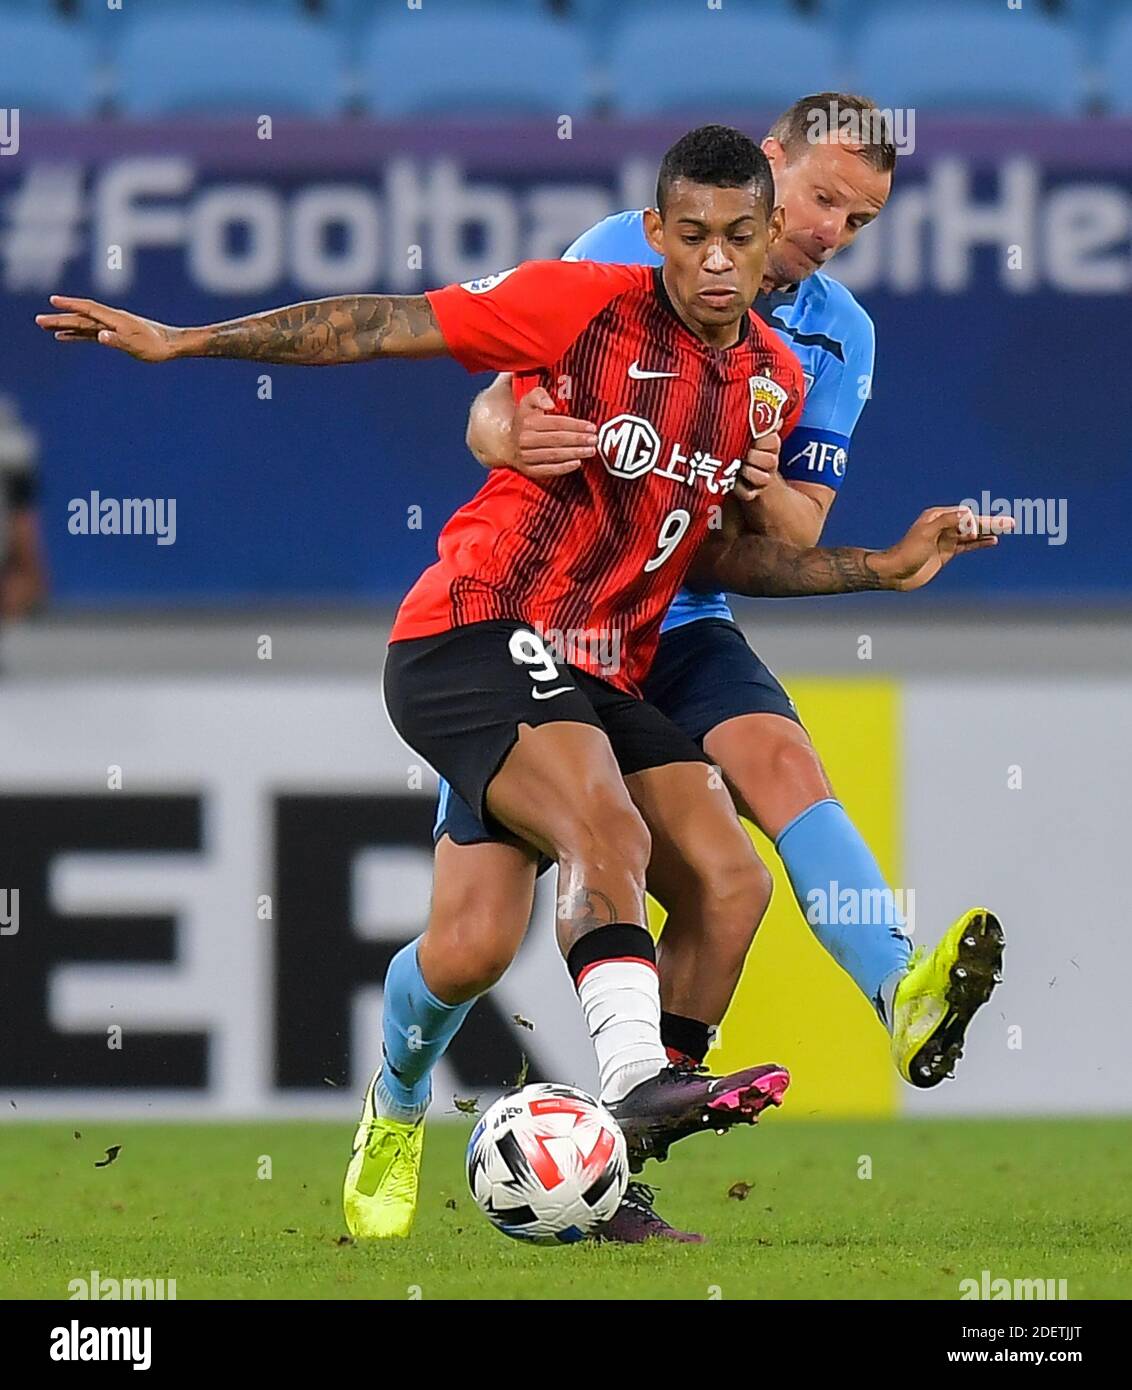 Doha, Qatar. 1st Dec, 2020. Ricardo Lopes (front) of Shanghai SIPG FC vies with Alex Wilkinson of Sydney FC during a Group H football match of the AFC Champions League between Shanghai SIPG FC of China and Sydney FC of Australia in Doha, Qatar, Dec. 1, 2020. Credit: Nikku/Xinhua/Alamy Live News Stock Photo